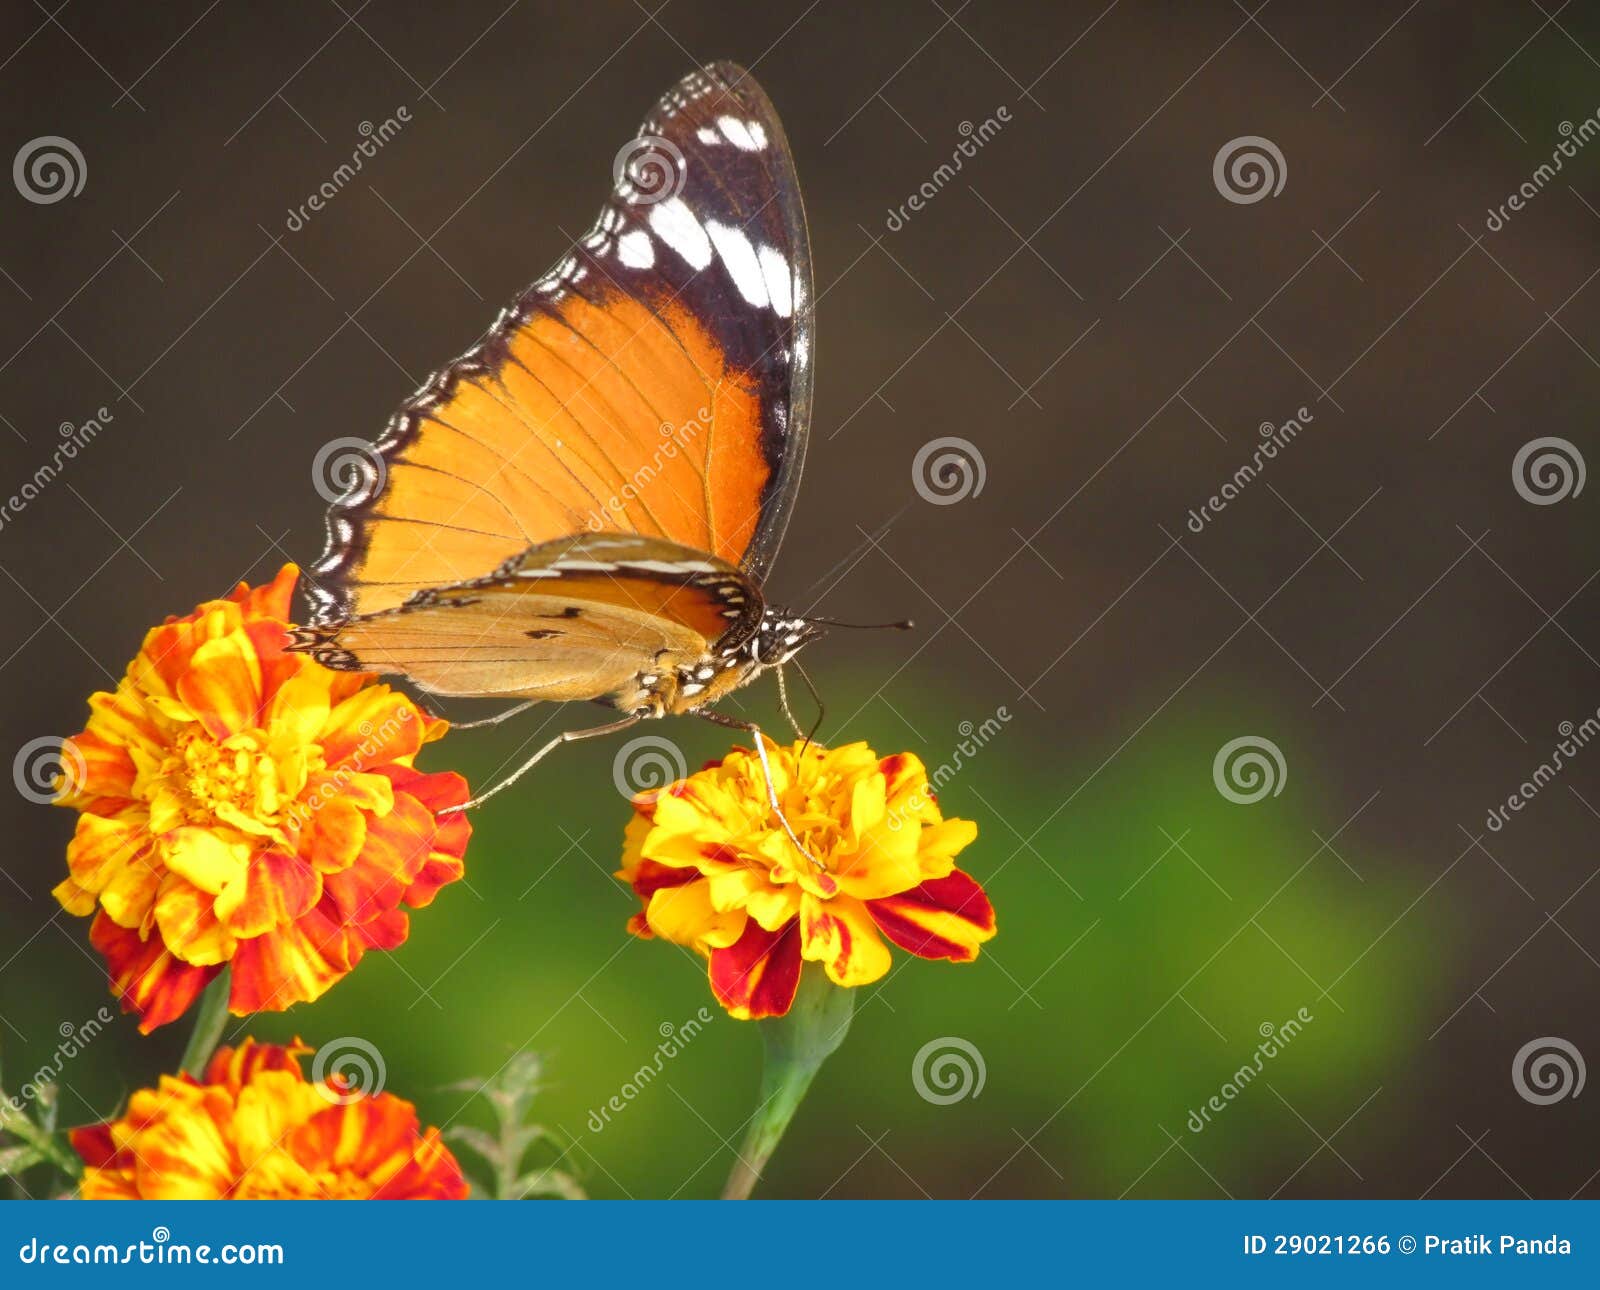 butterfly, flowers and cross pollination